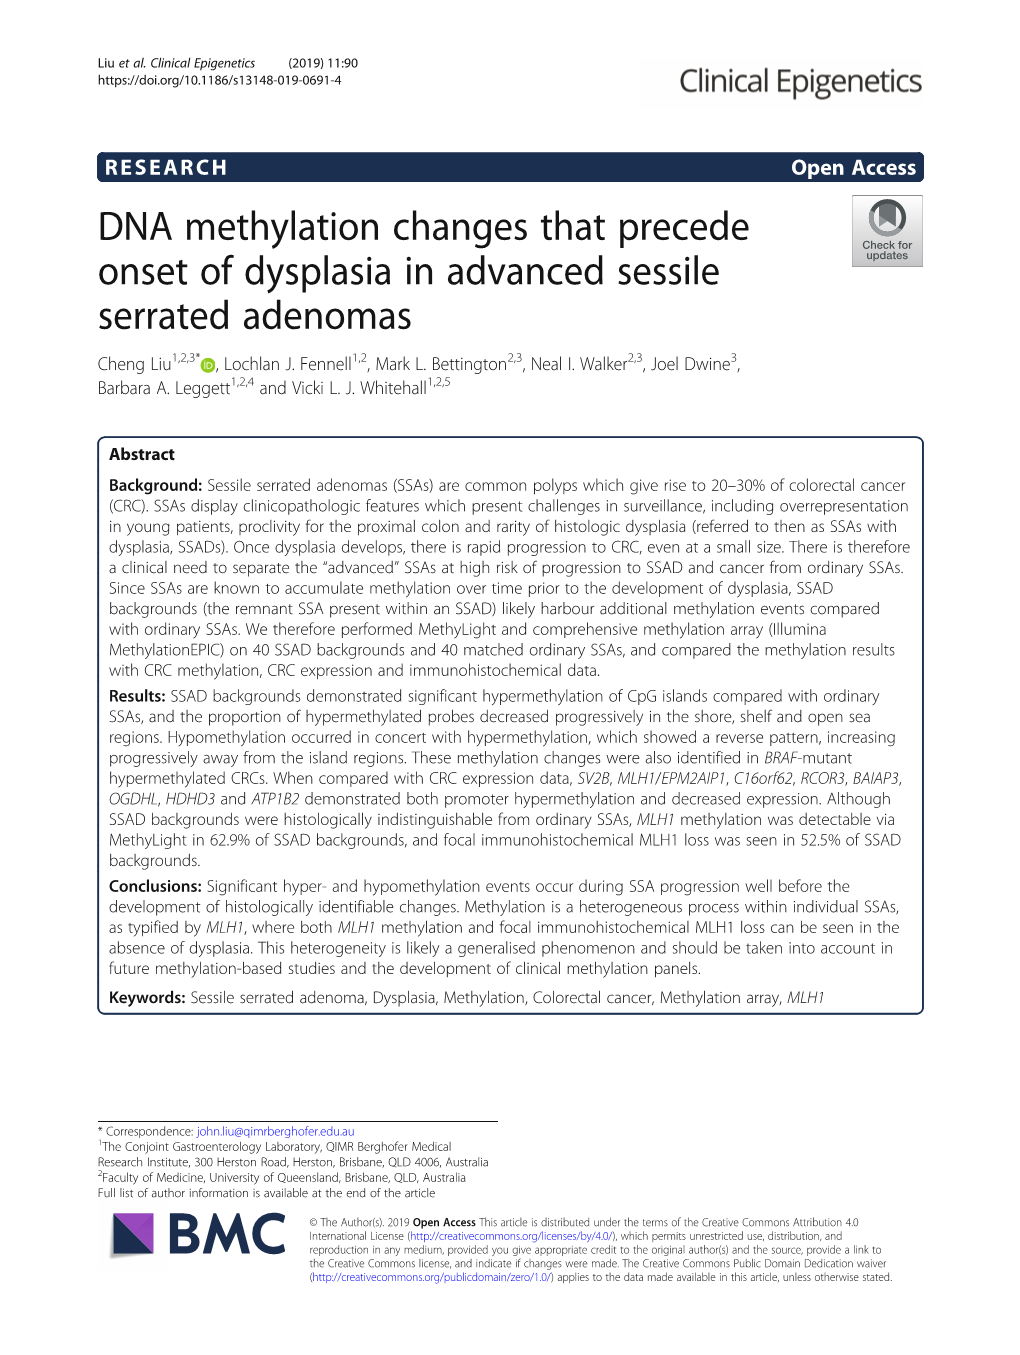 DNA Methylation Changes That Precede Onset of Dysplasia in Advanced Sessile Serrated Adenomas Cheng Liu1,2,3* , Lochlan J